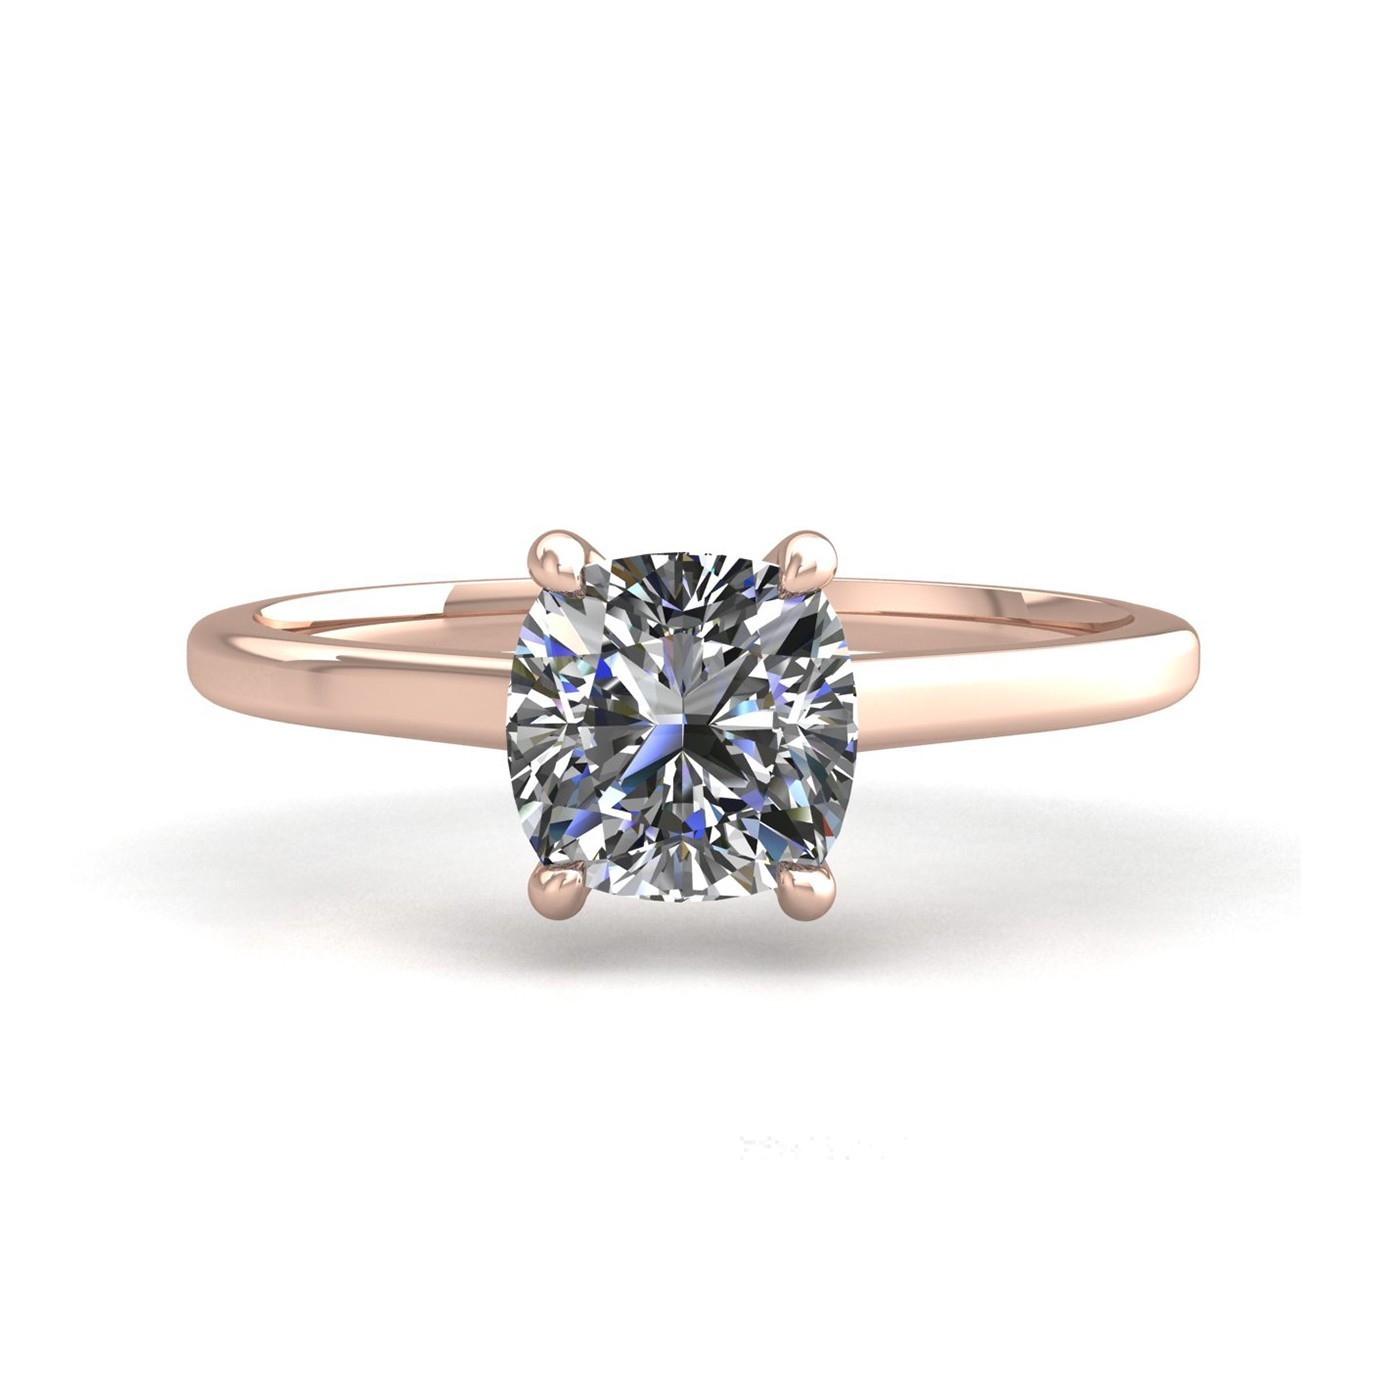 18k rose gold 1.0ct 4 prongs solitaire cushion cut diamond engagement ring with whisper thin band